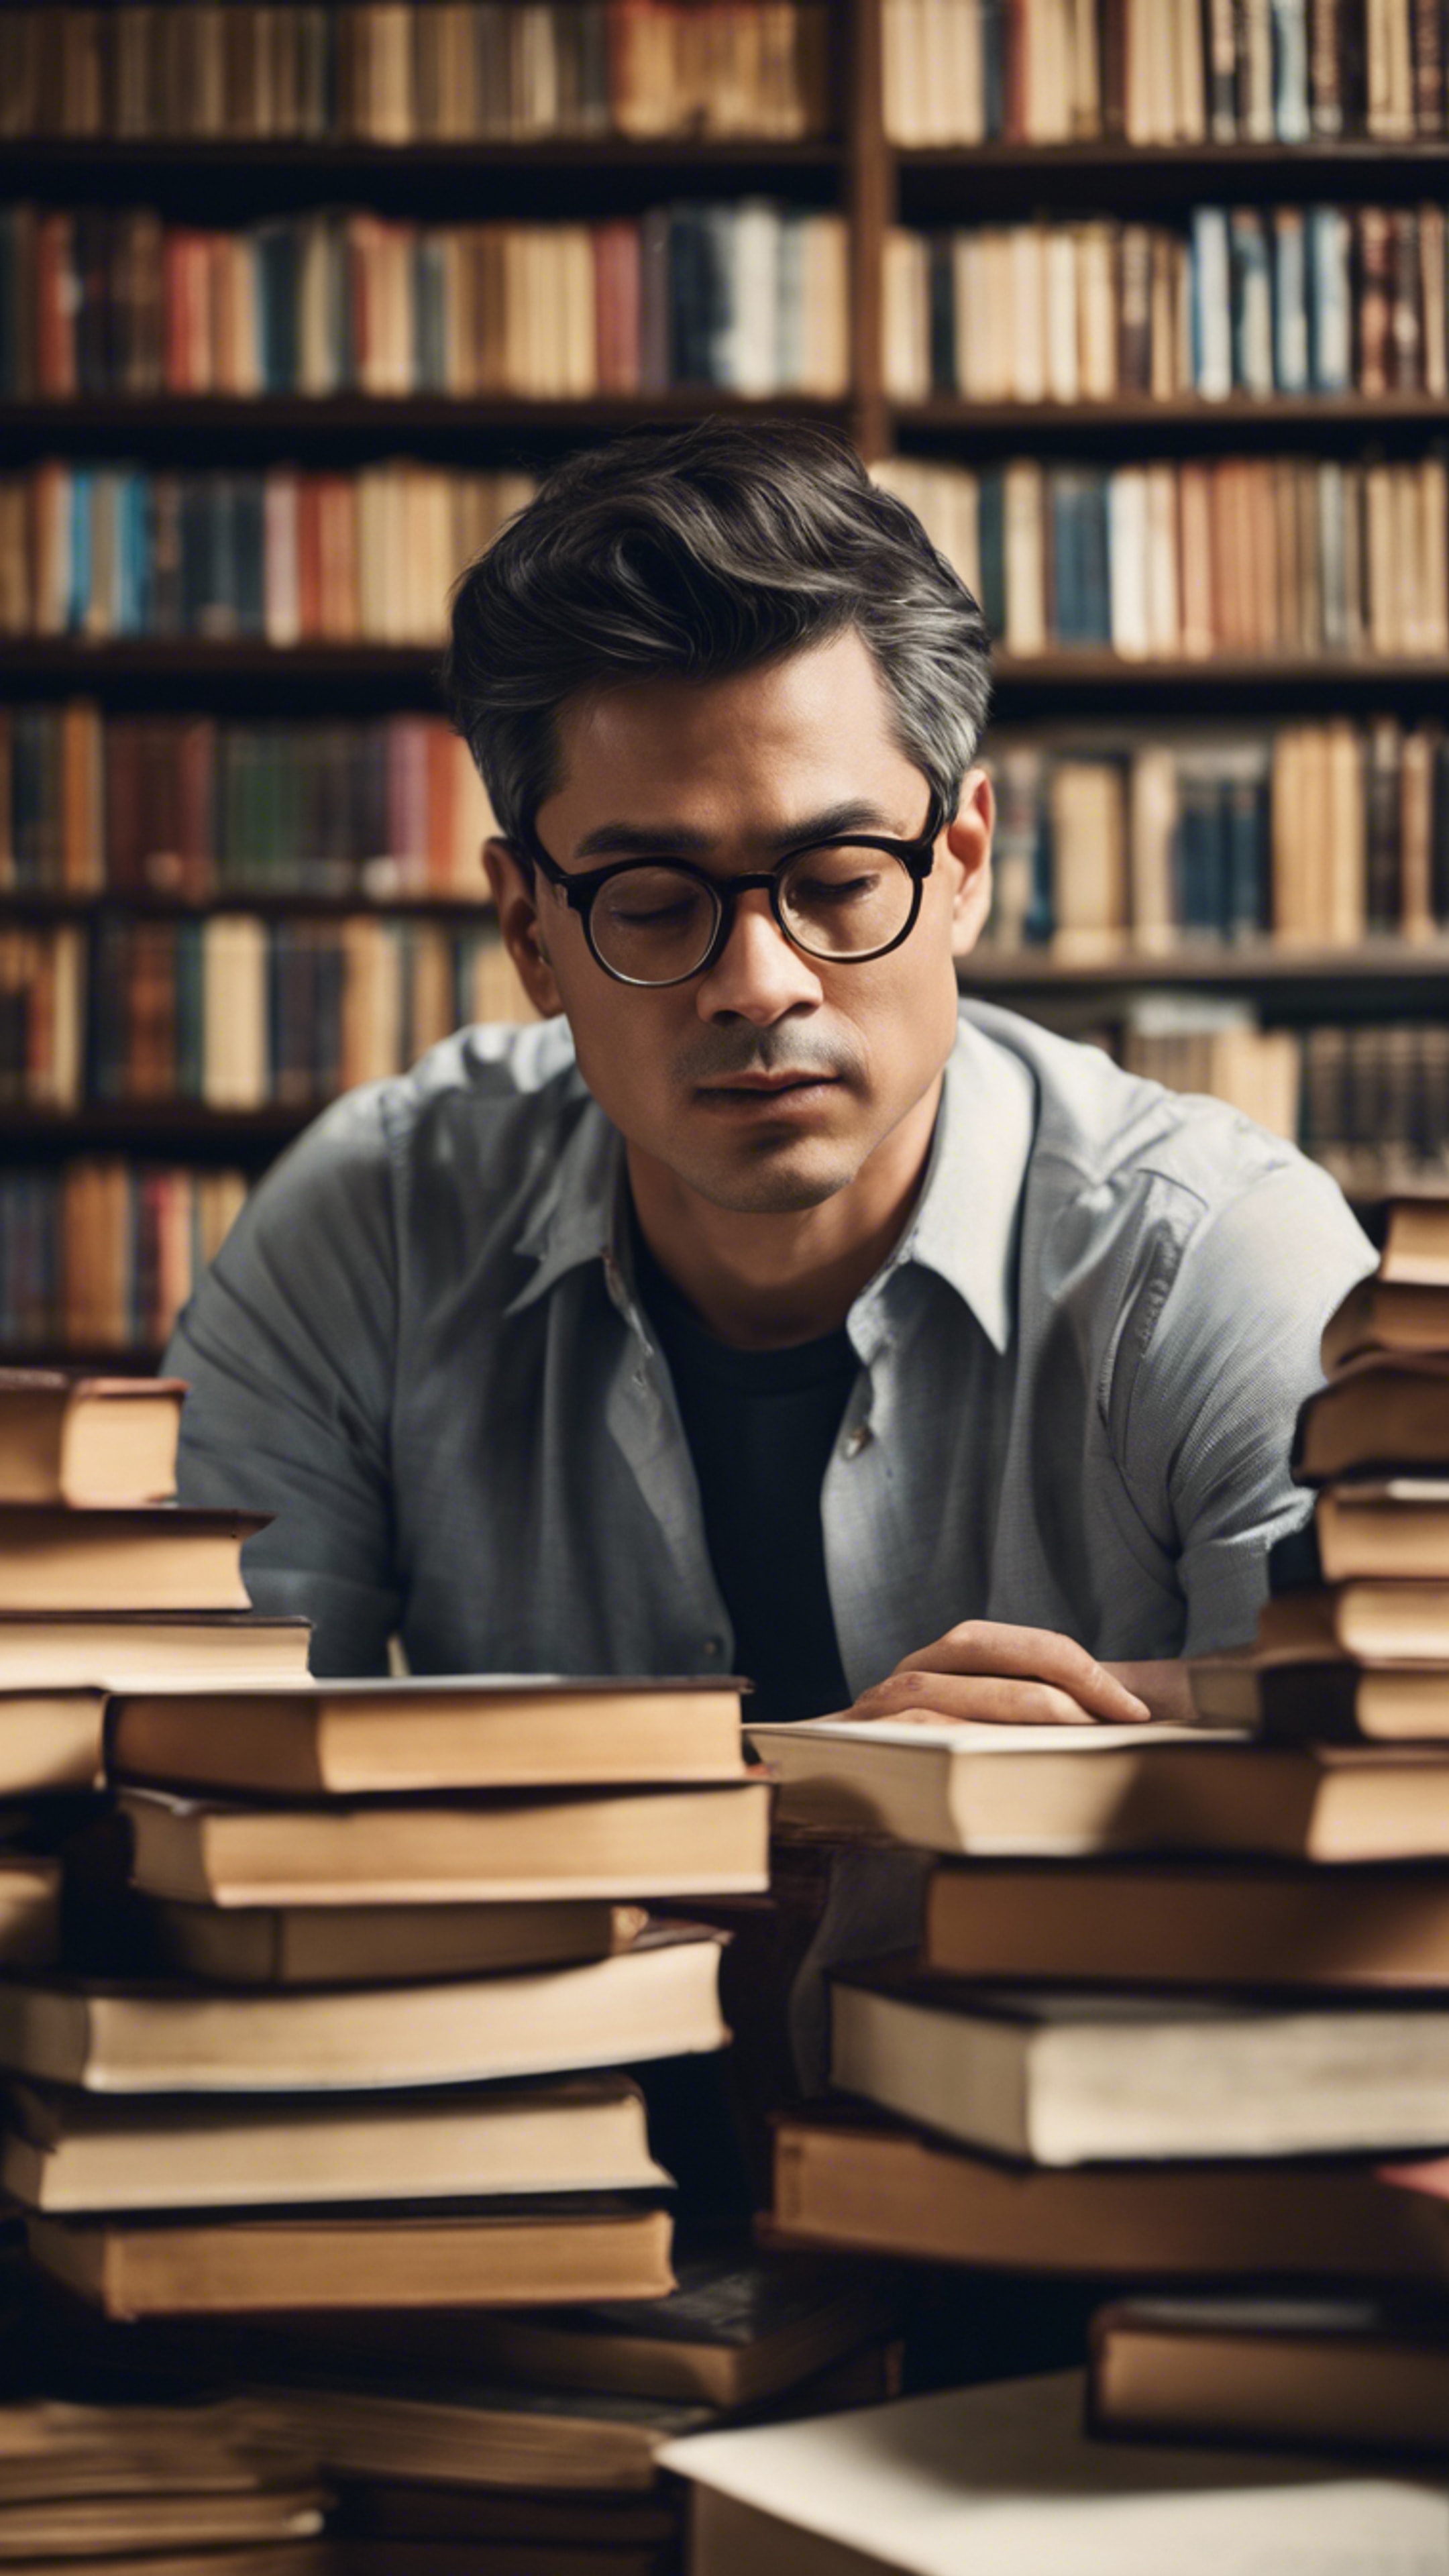 An intelligent man in glasses, deeply engrossed in his studies surrounded by stacks of books in a quiet library. Tapeta[88f4531613da45079a41]